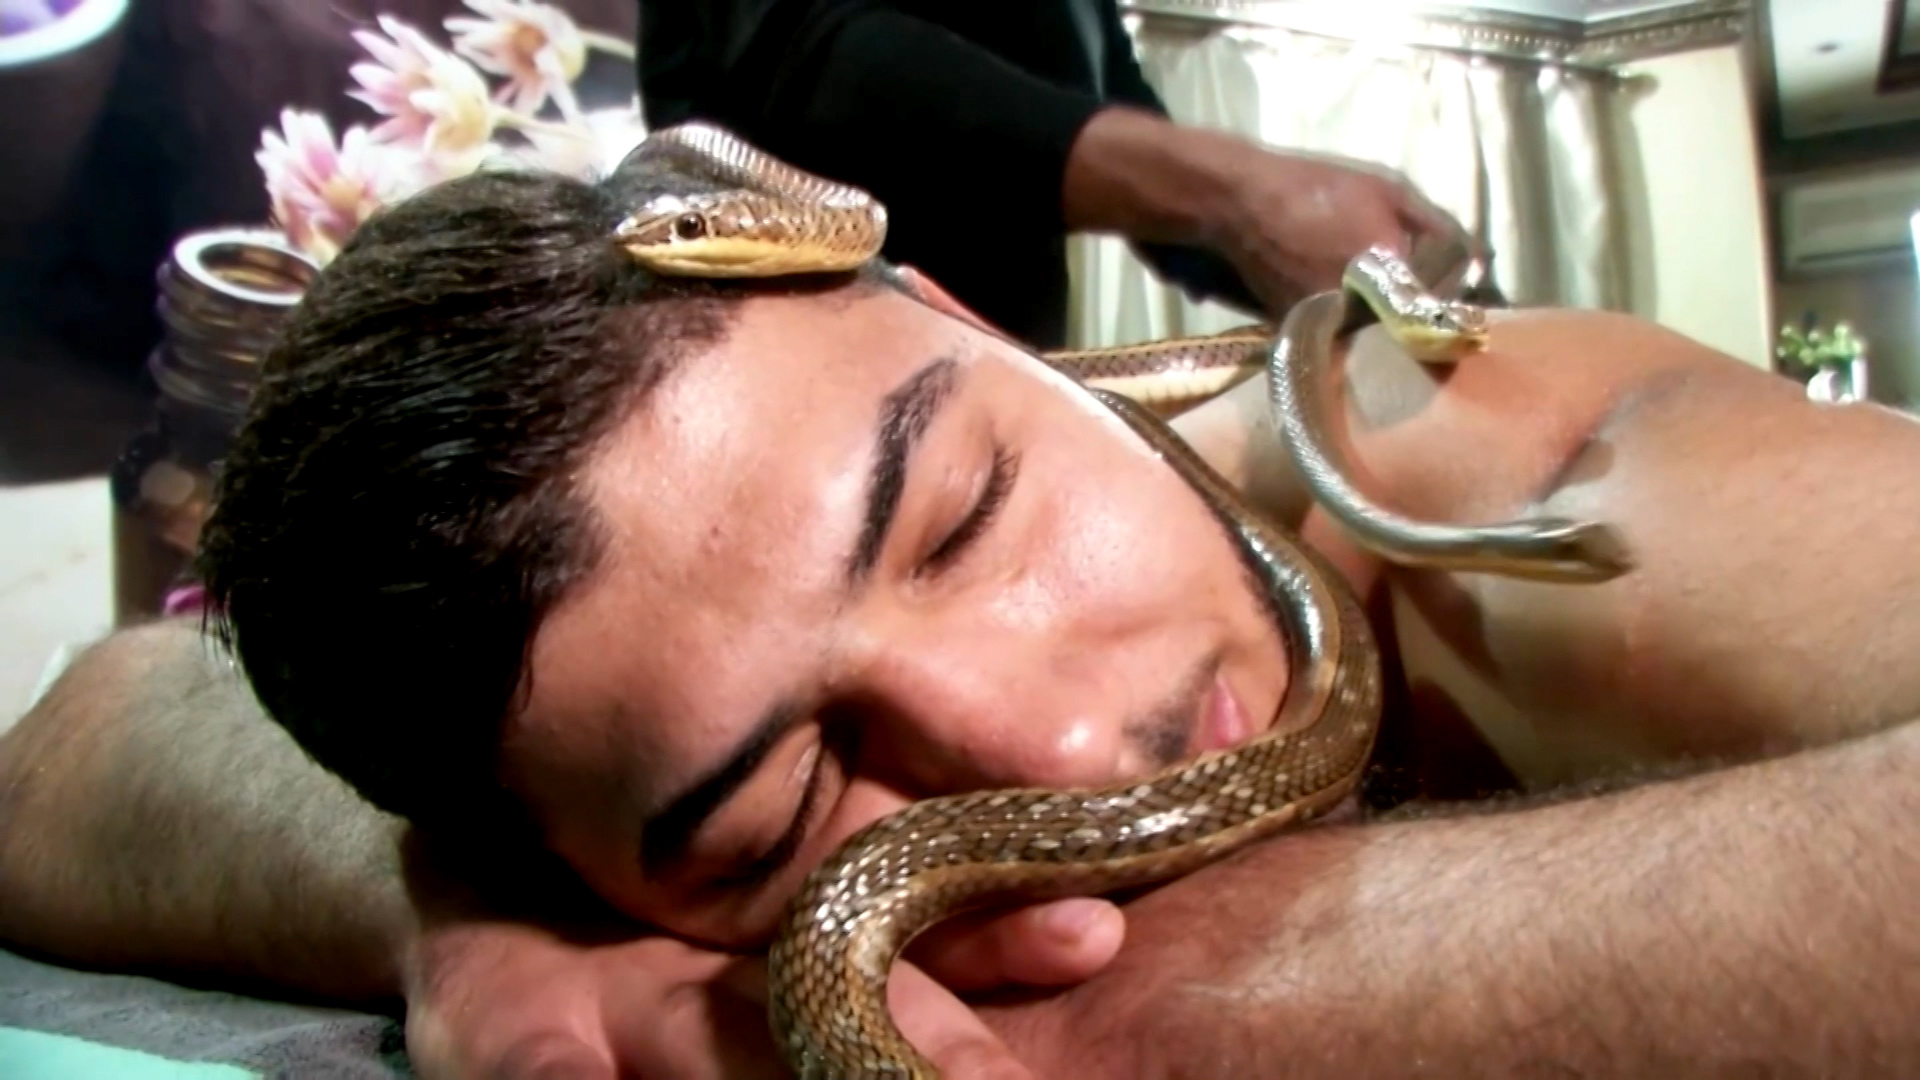 Massage technique using snakes might not be for everybody - CNN Video